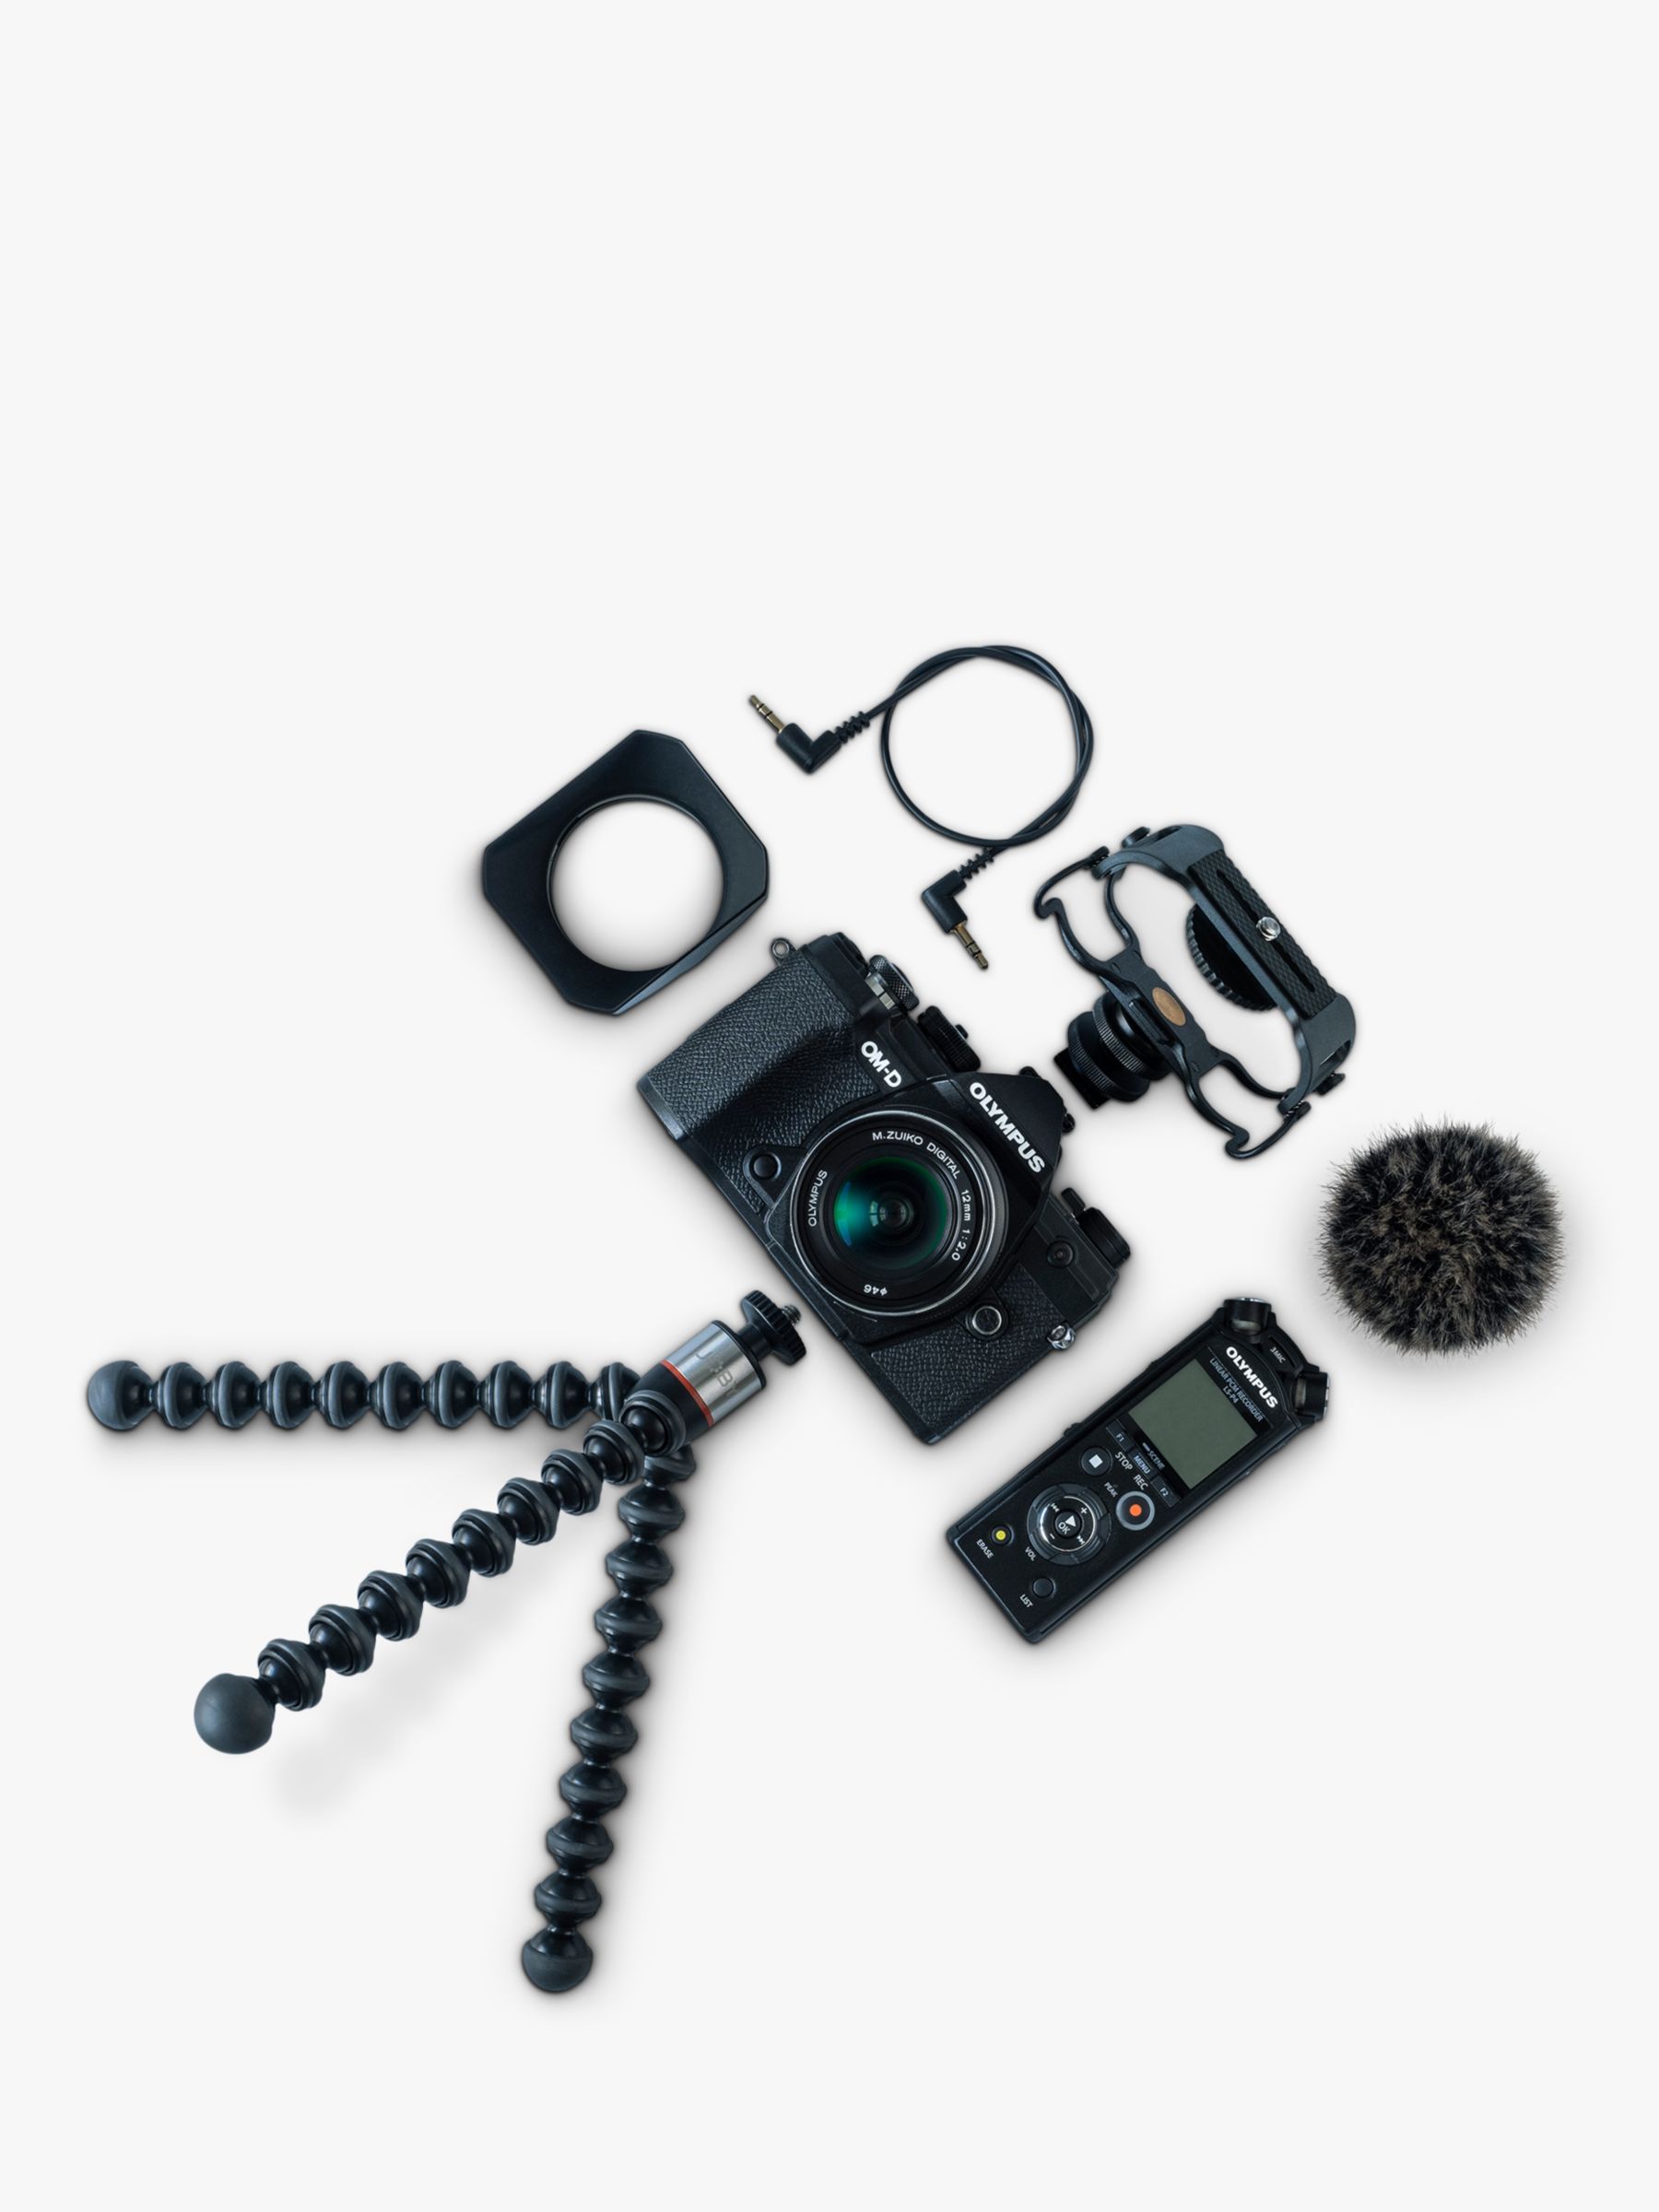 Image of Olympus OMD EM5 Mark III Compact System Camera with 12mm Lens 4K Ultra HD 204MP WiFi Bluetooth EVF 3 Variangle Touch Screen Black Vlogger Kit with Audio Recorder and Joby Gorillapod